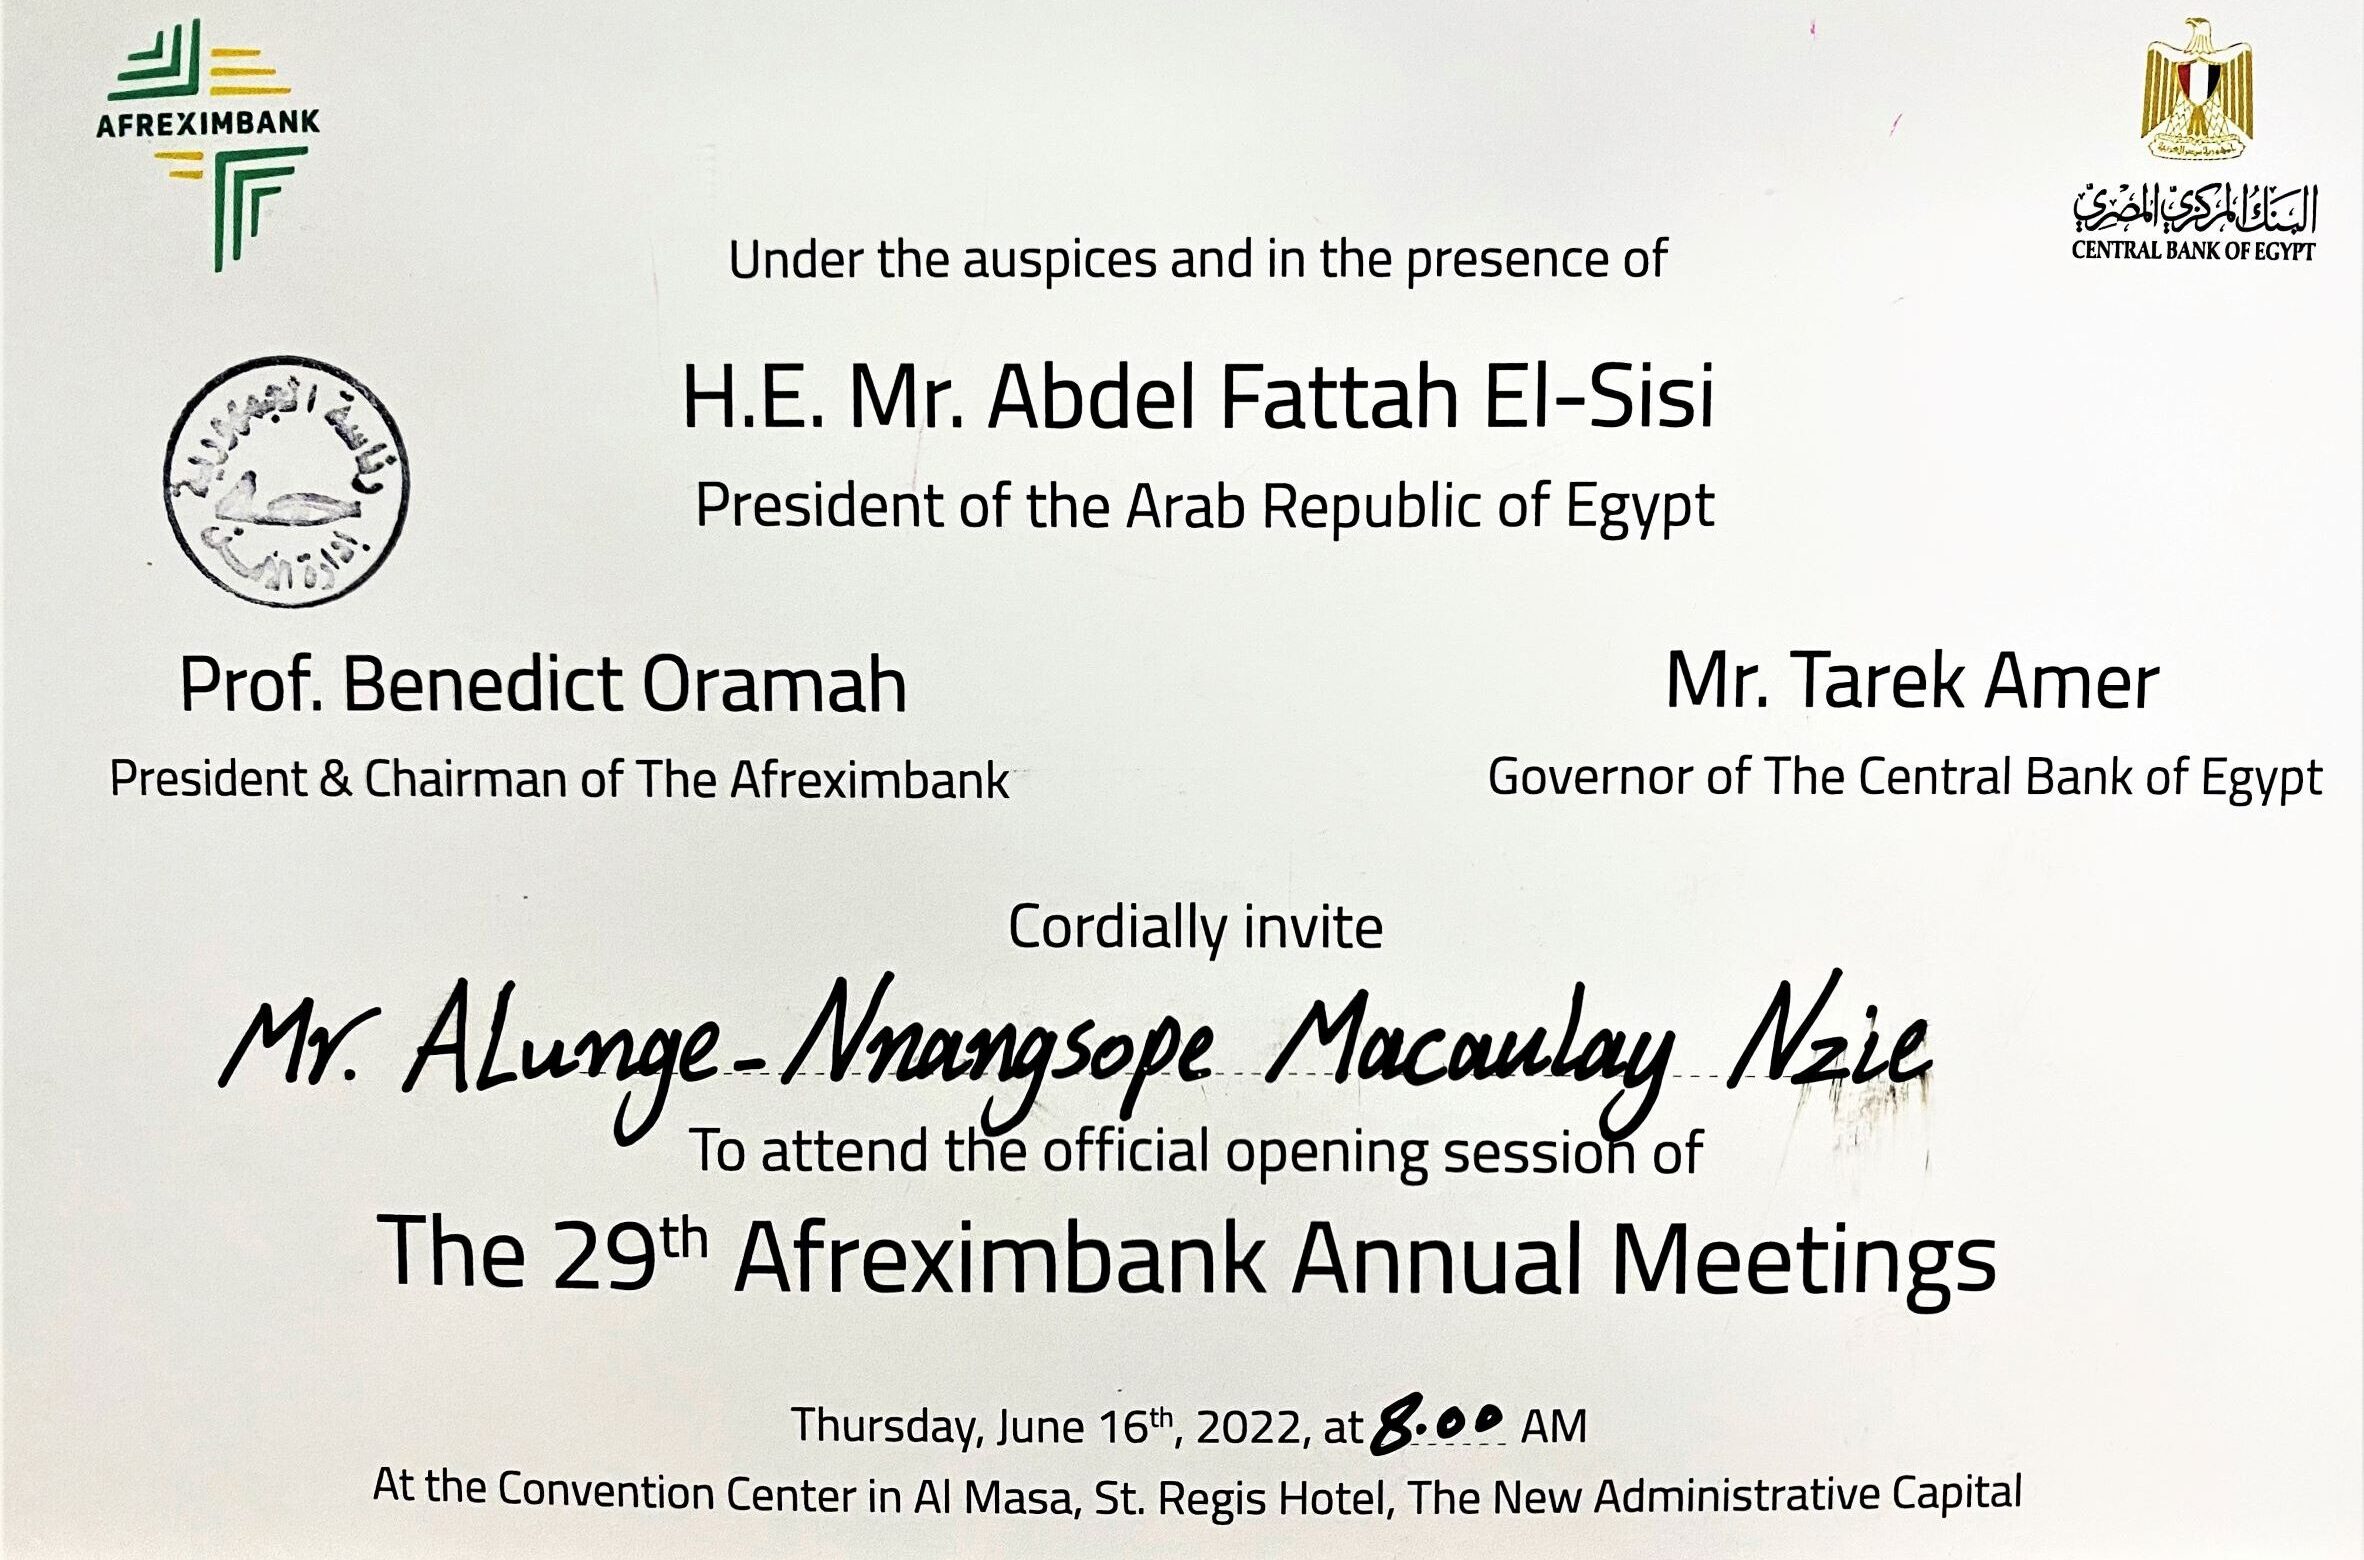 Mac Alunge invited by the President of Egypt, Governor of Central Bank of Egypt and Director of Afreximbank resized